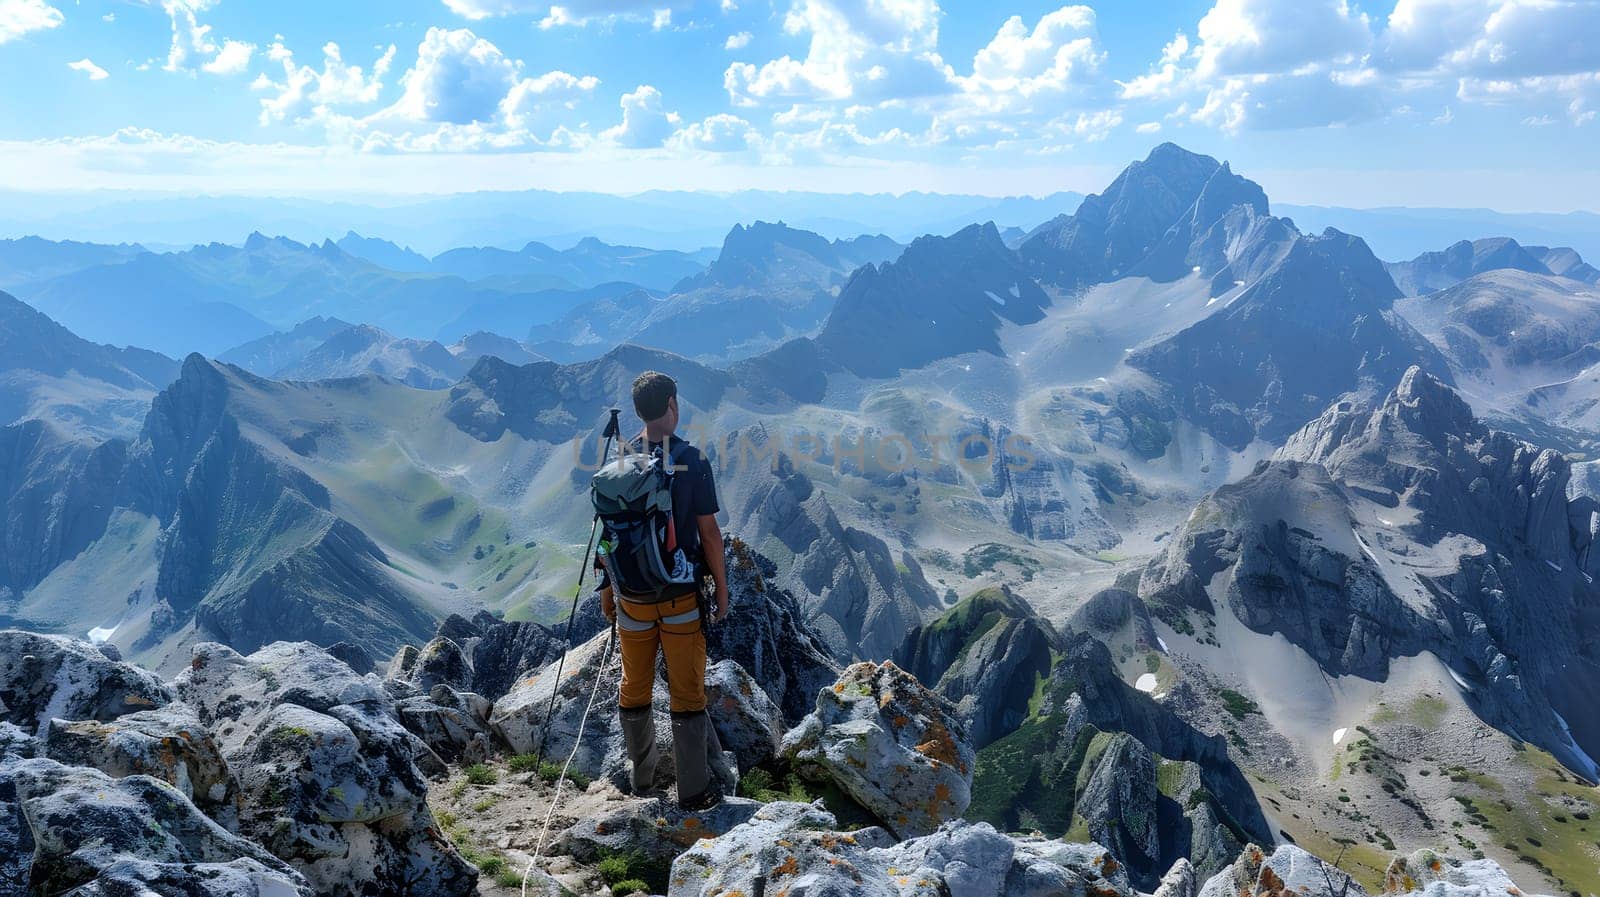 A traveler with a backpack enjoys the breathtaking view from the summit of a cloudcovered mountain in a pristine ecoregion, surrounded by mountainous landforms and a natural landscape